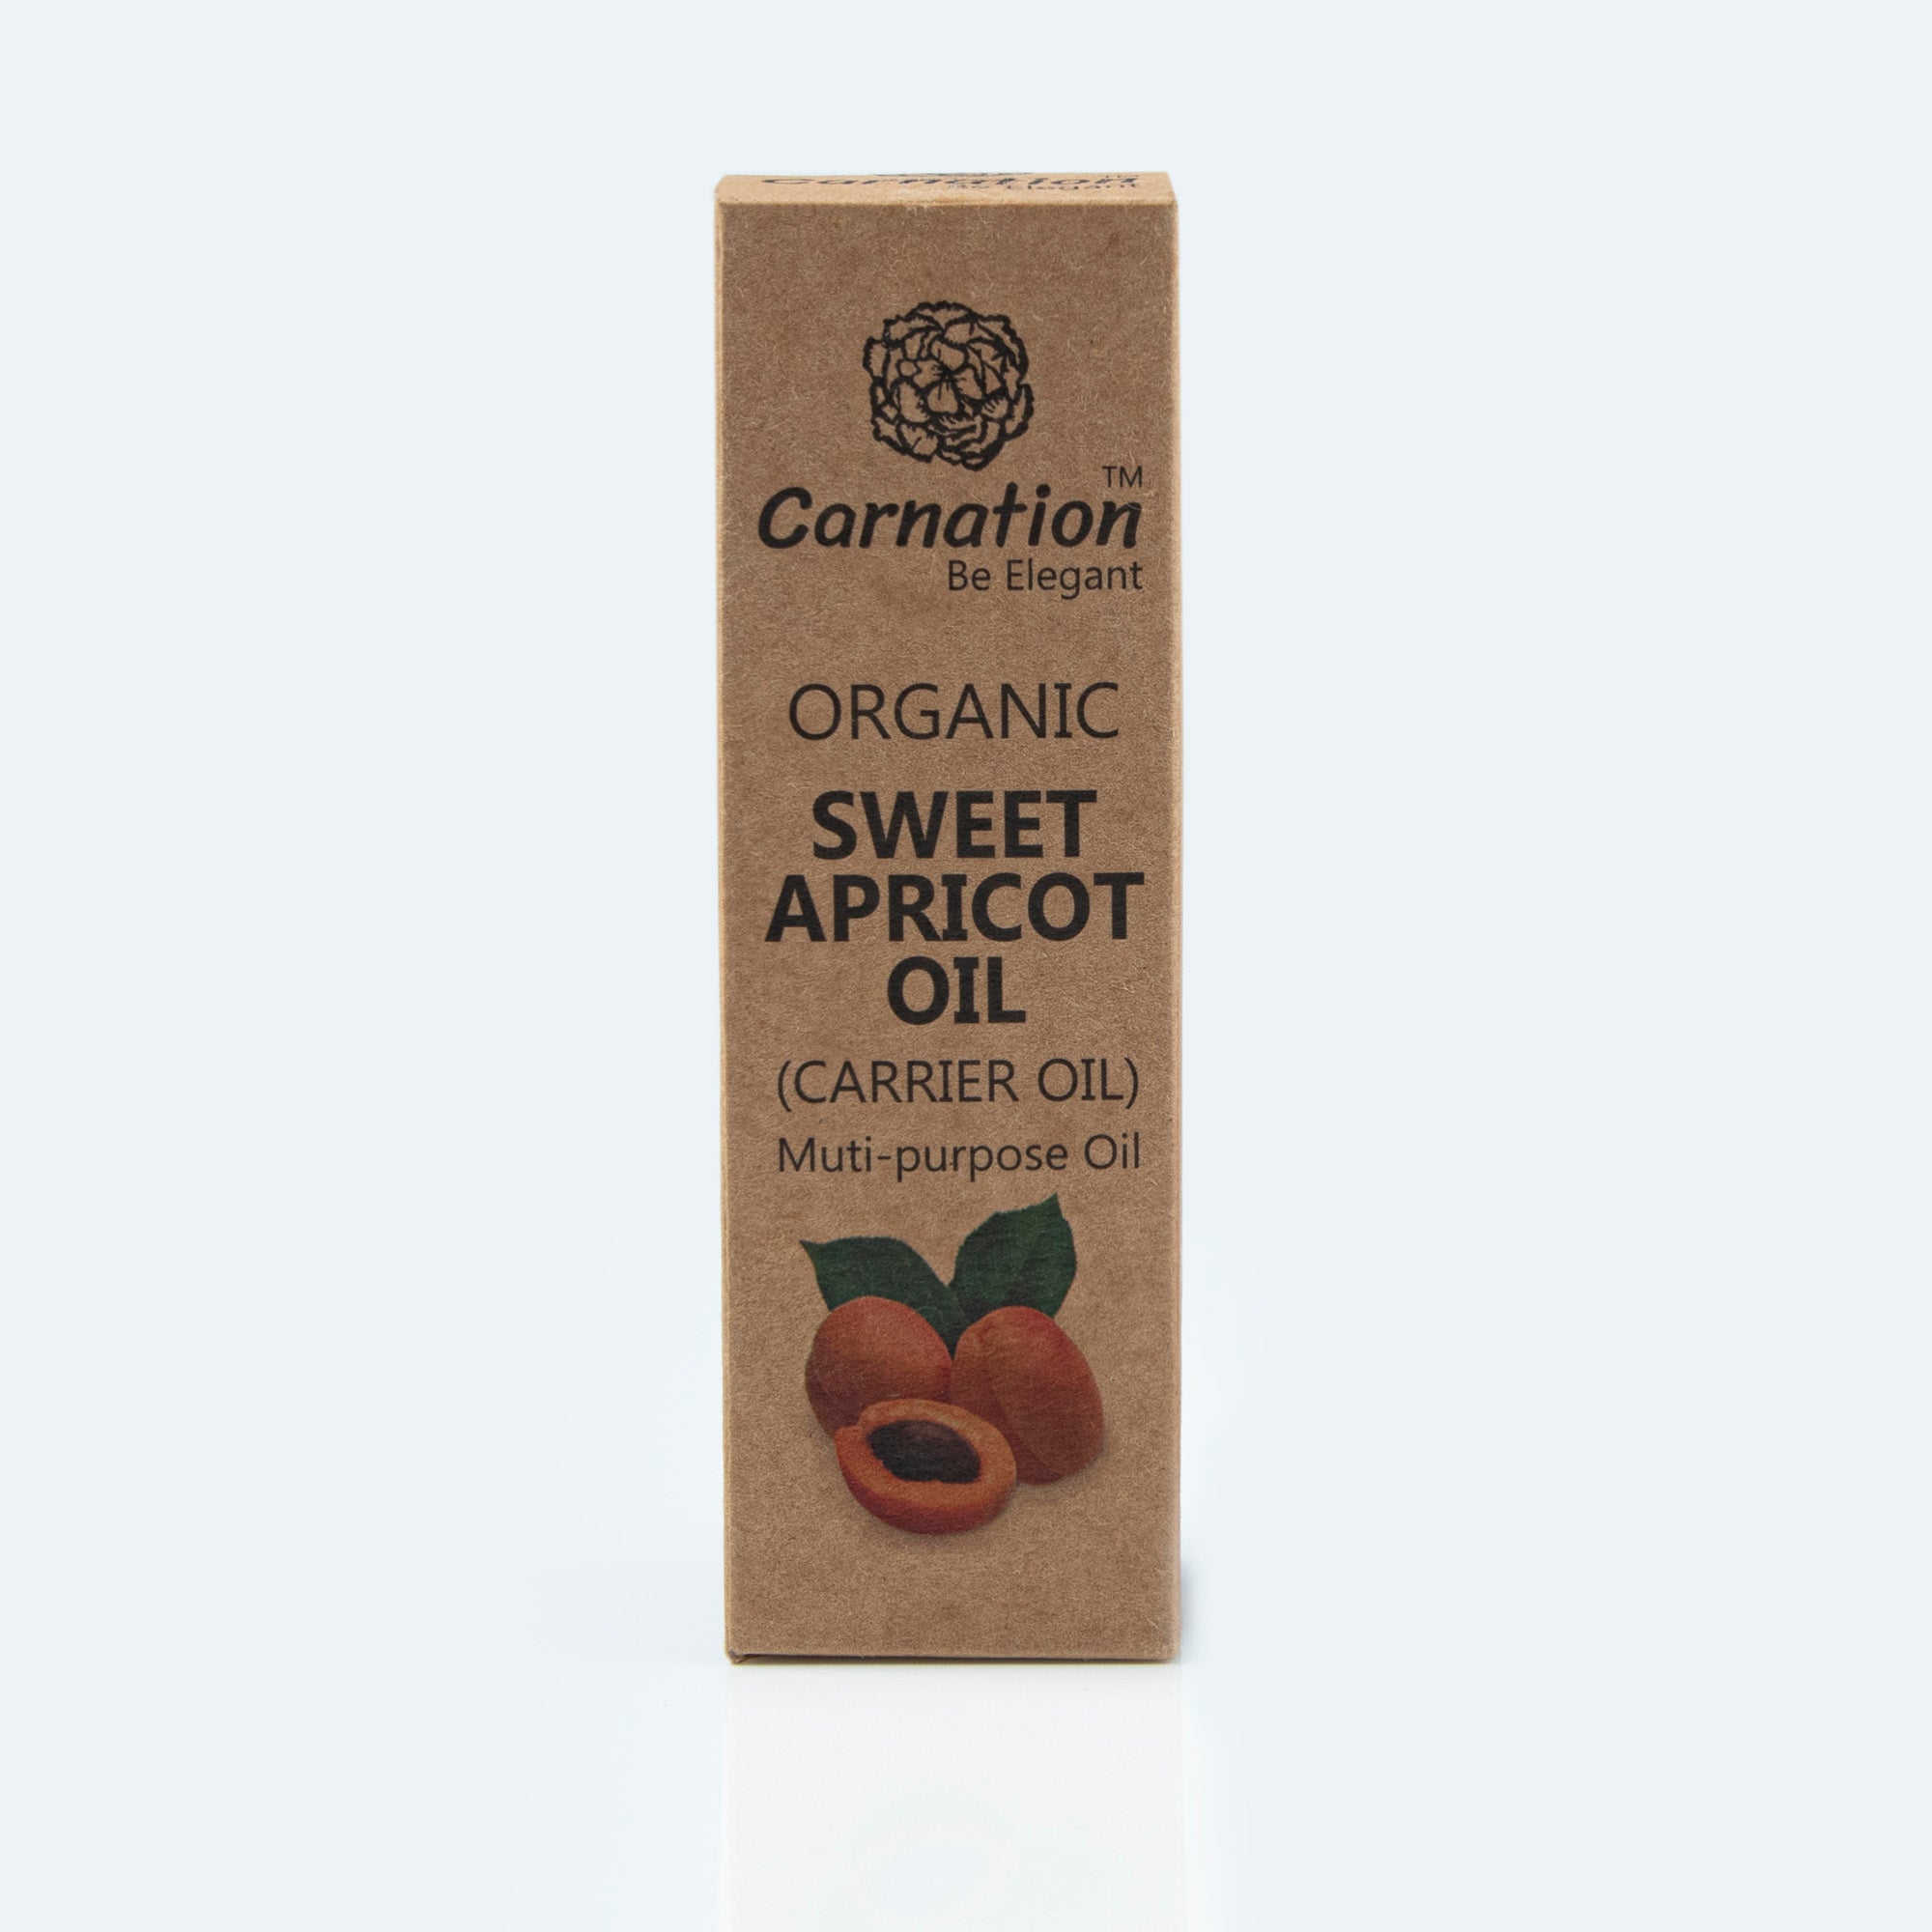 SWEET APRICOT OIL